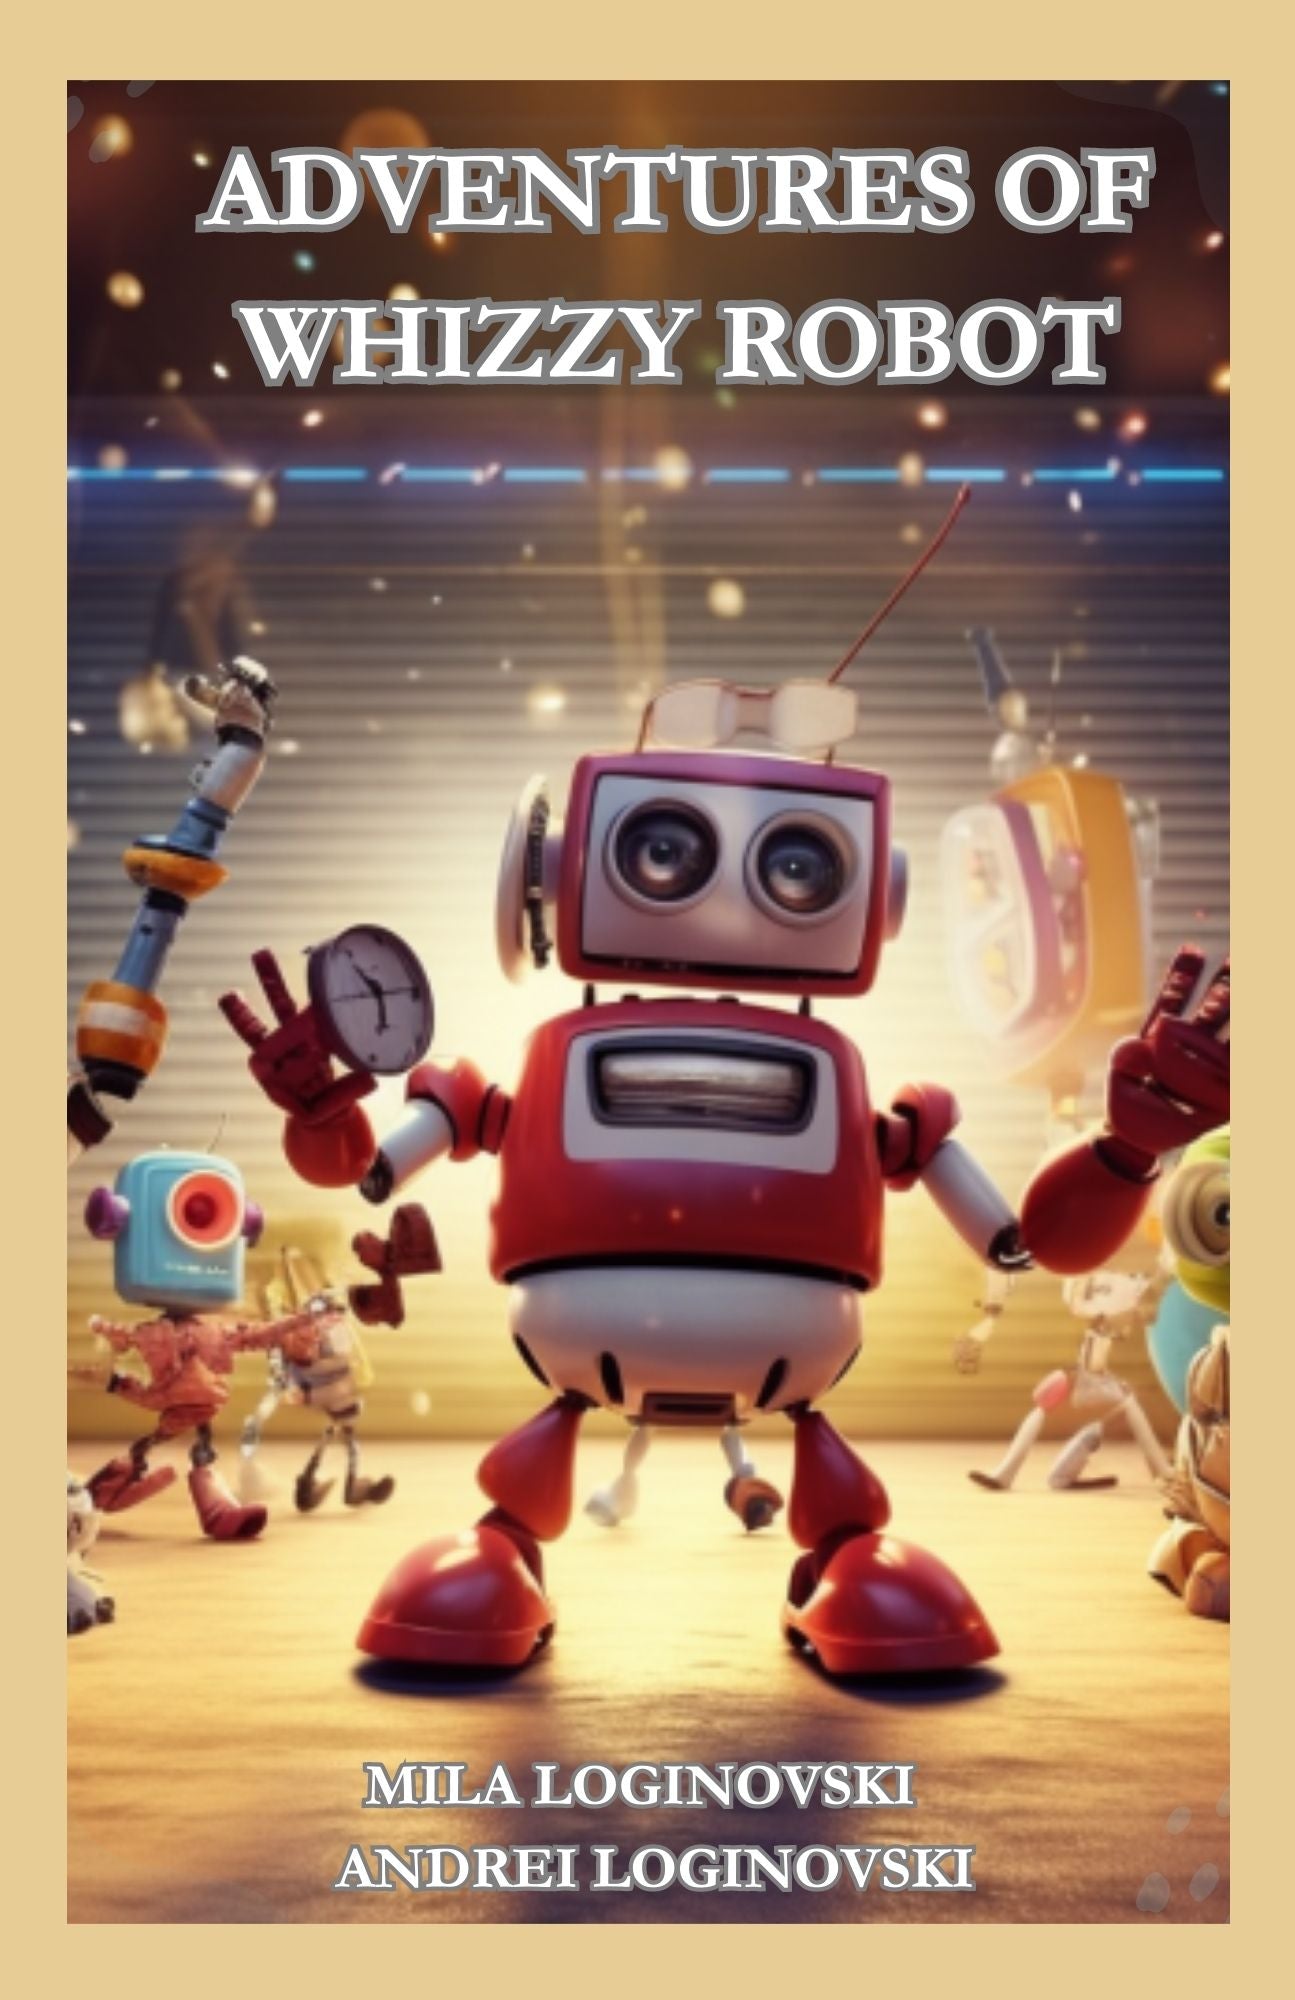 Book: Adventures of Whizzy Robot